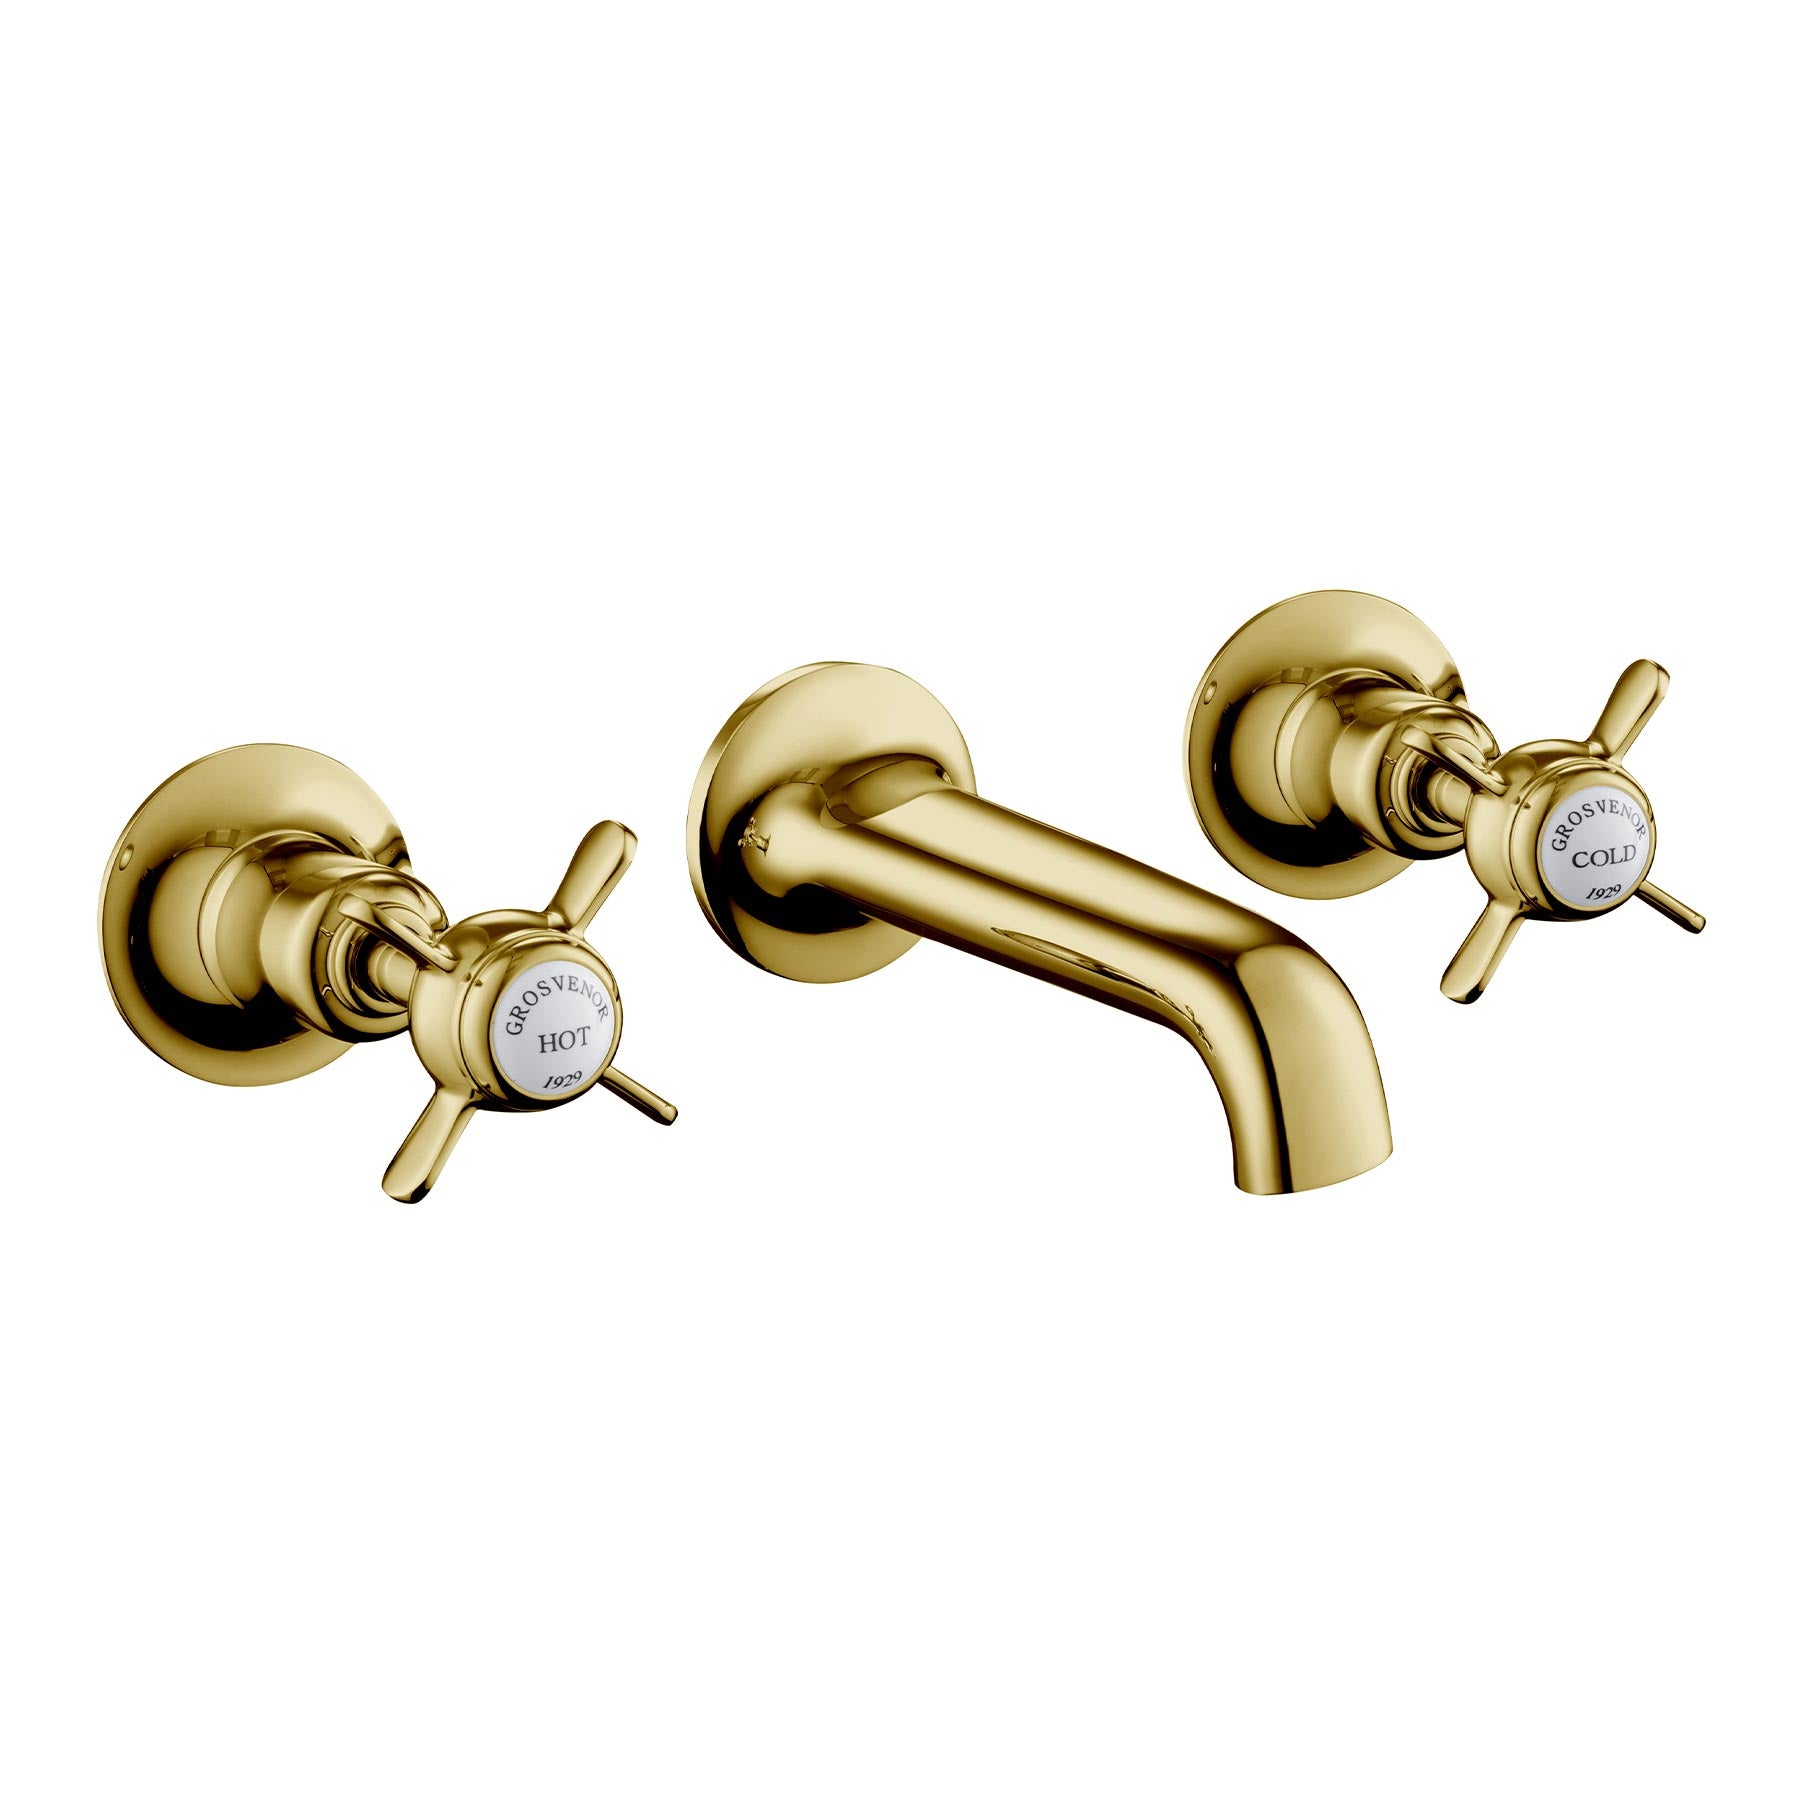 Gold Wall mounted traditional basin tap 3 hole